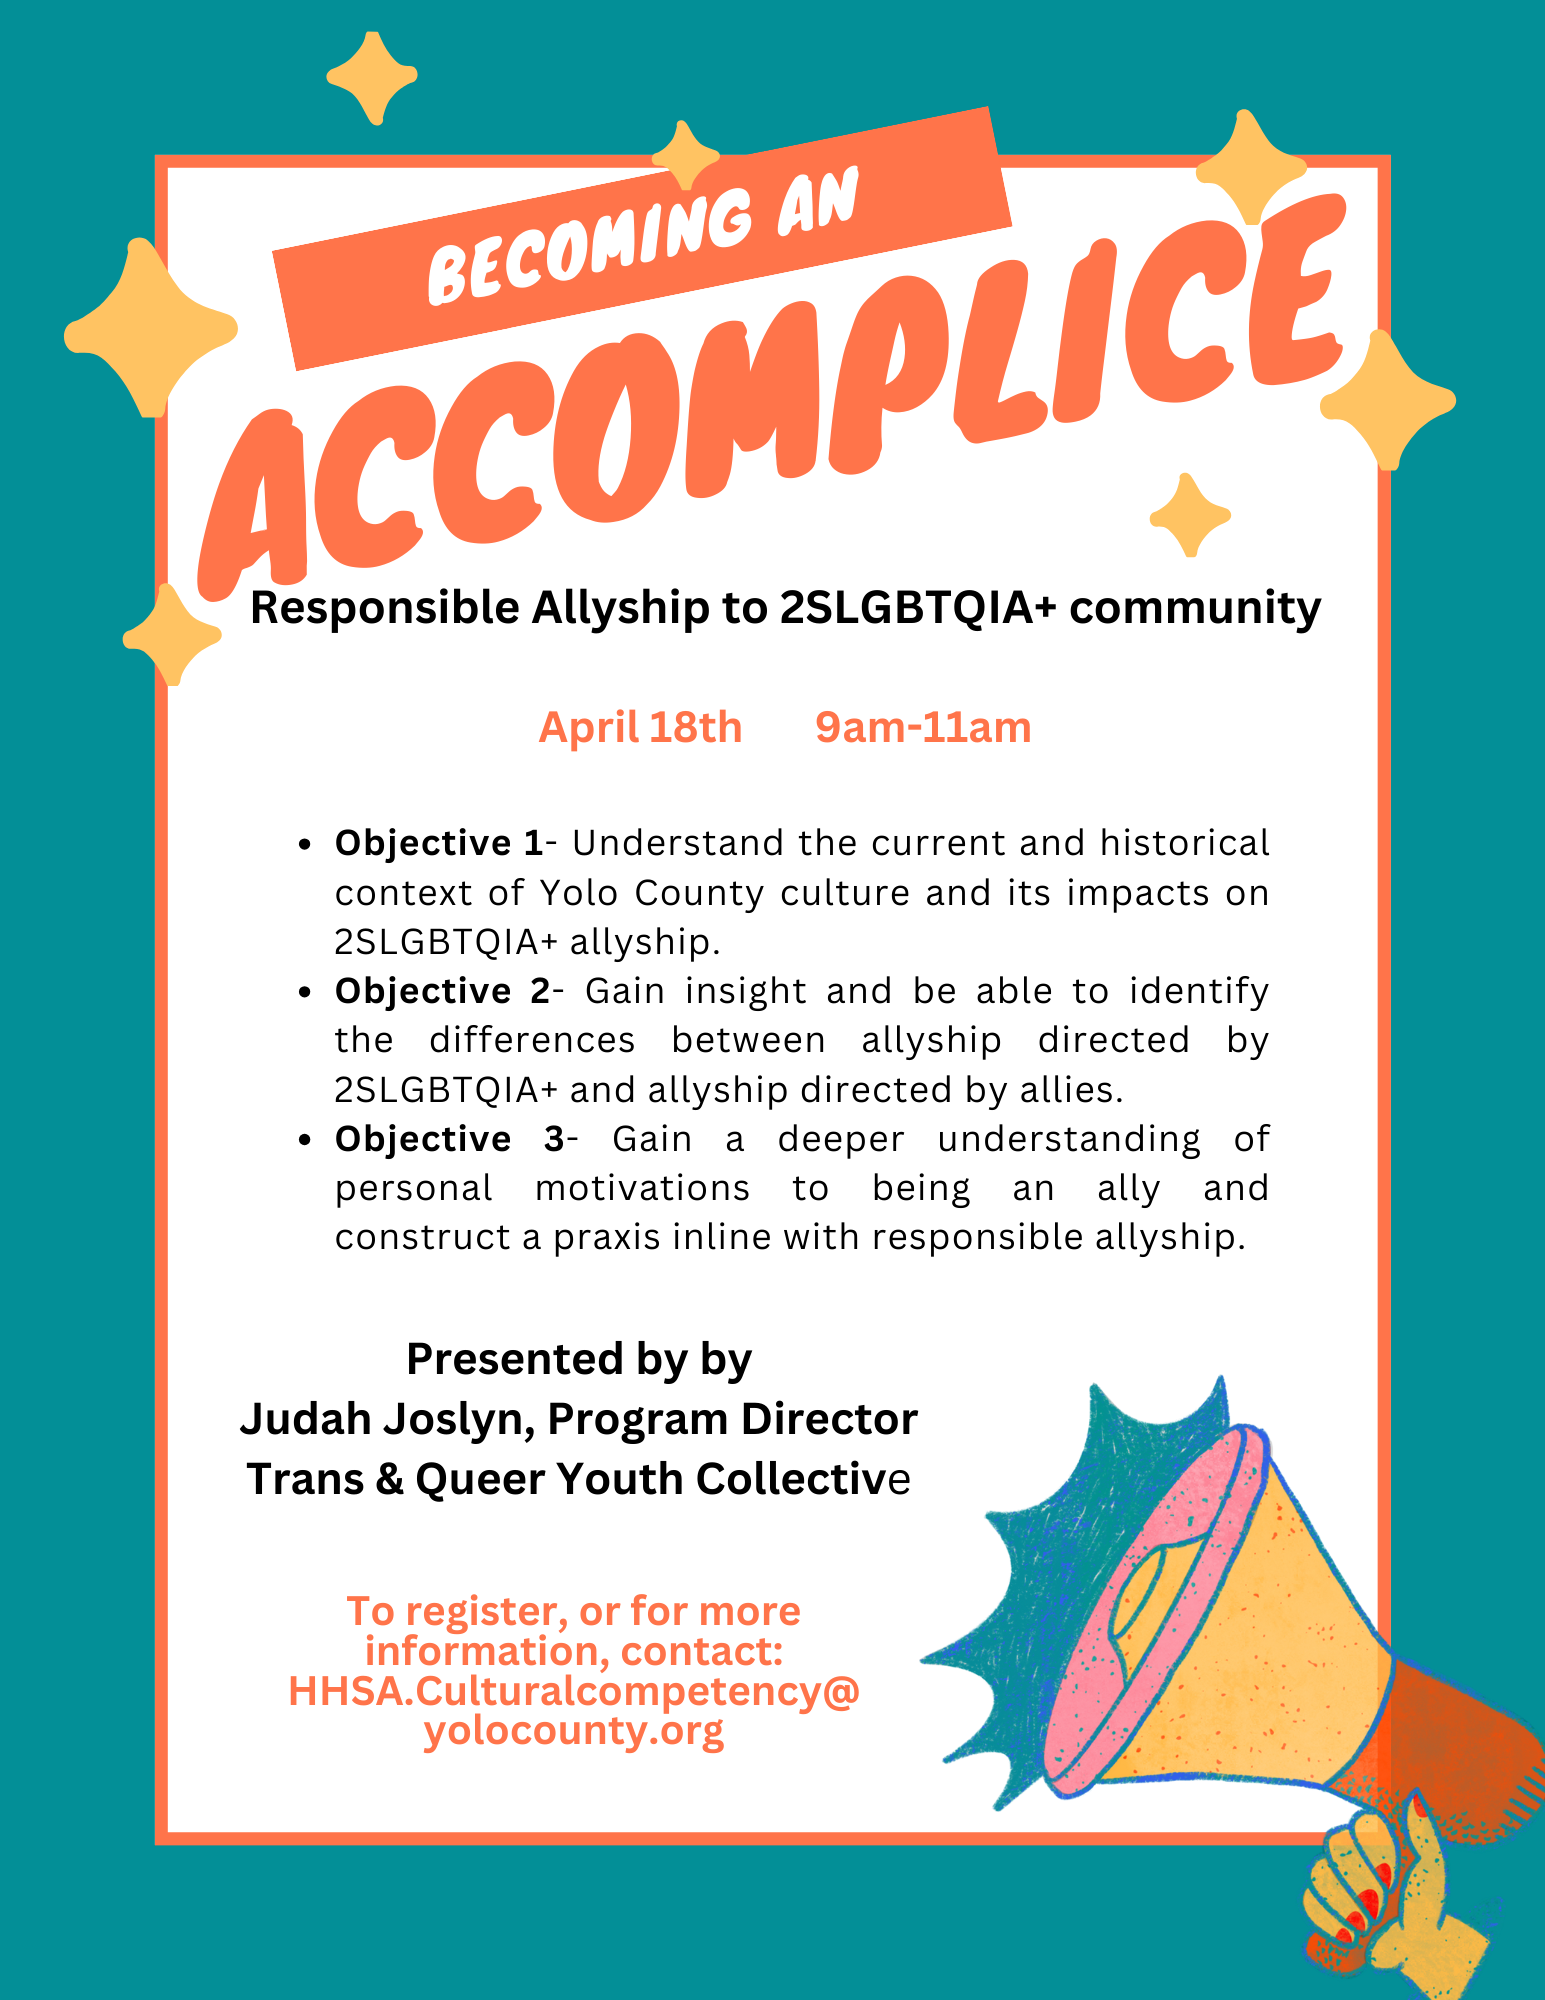 A flyer for "Responsible Allyship" on April 18 from 1 am - 11 am presented by Judah Joslyn, program director for Trans & Queer Youth Collective